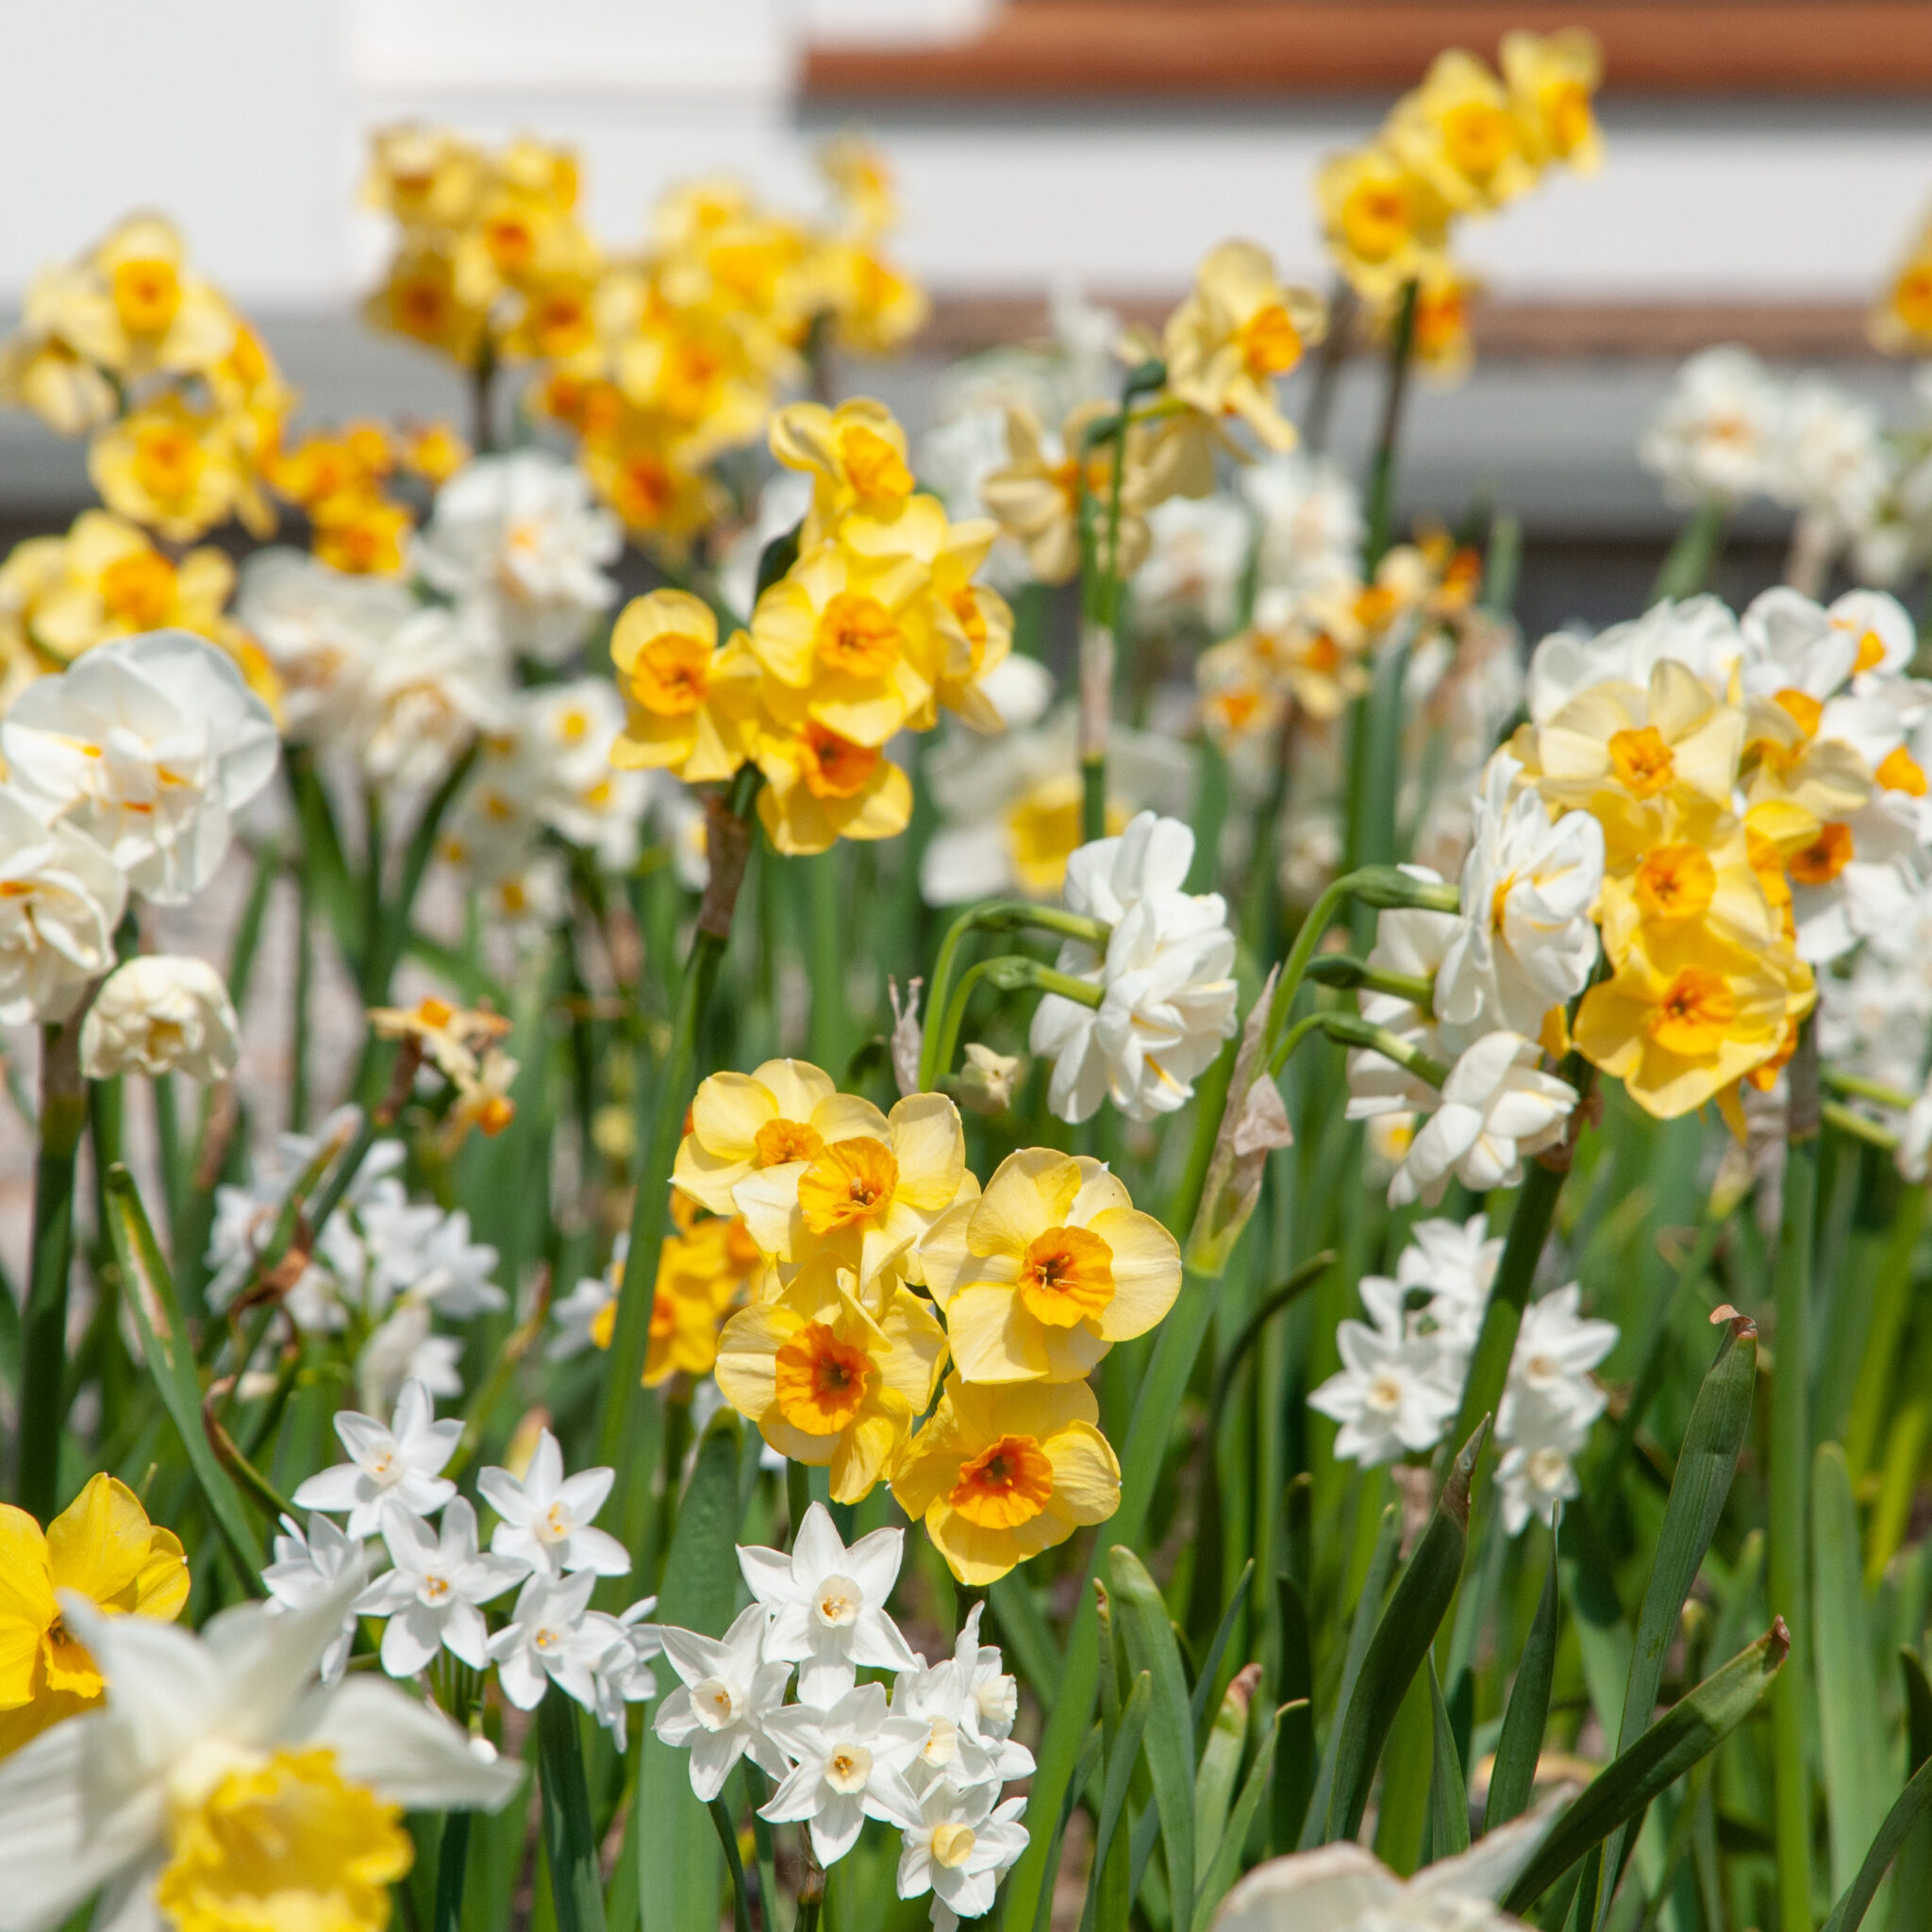 https://www.colorblends.com/wp-content/uploads/2020/08/3707_ScillyDaffs_AGB4262sq-scaled.jpg